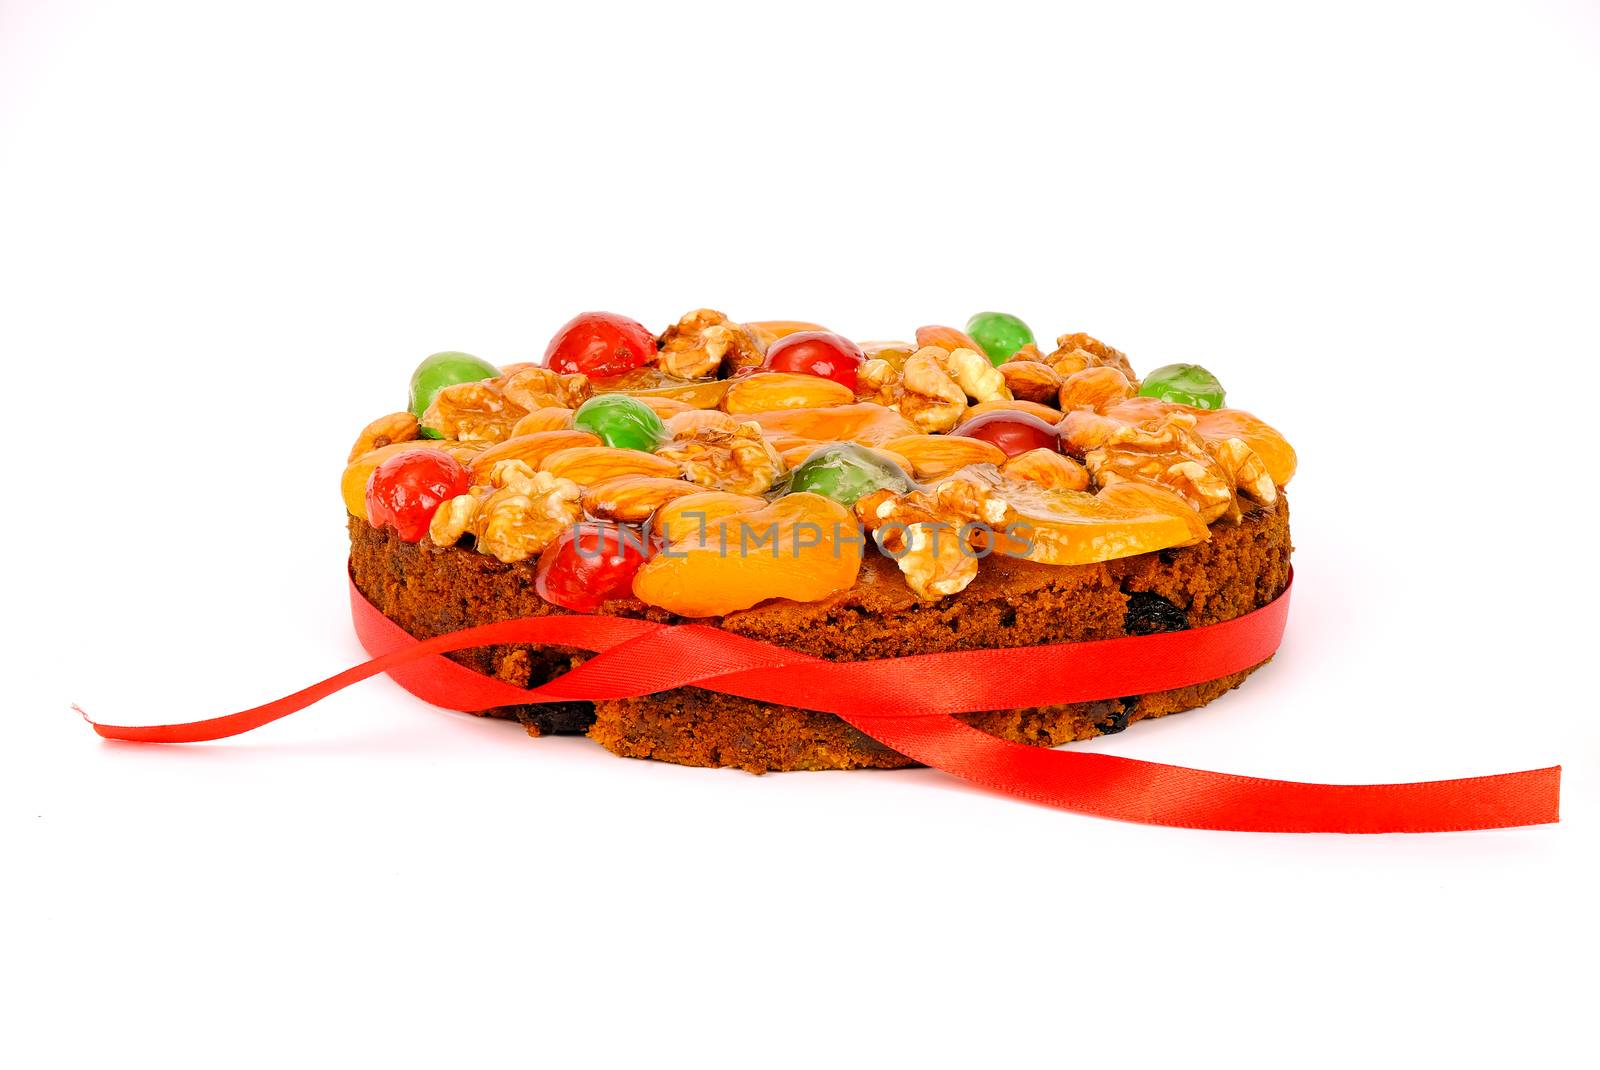 Christmas and New Year fruitcake by Nawoot